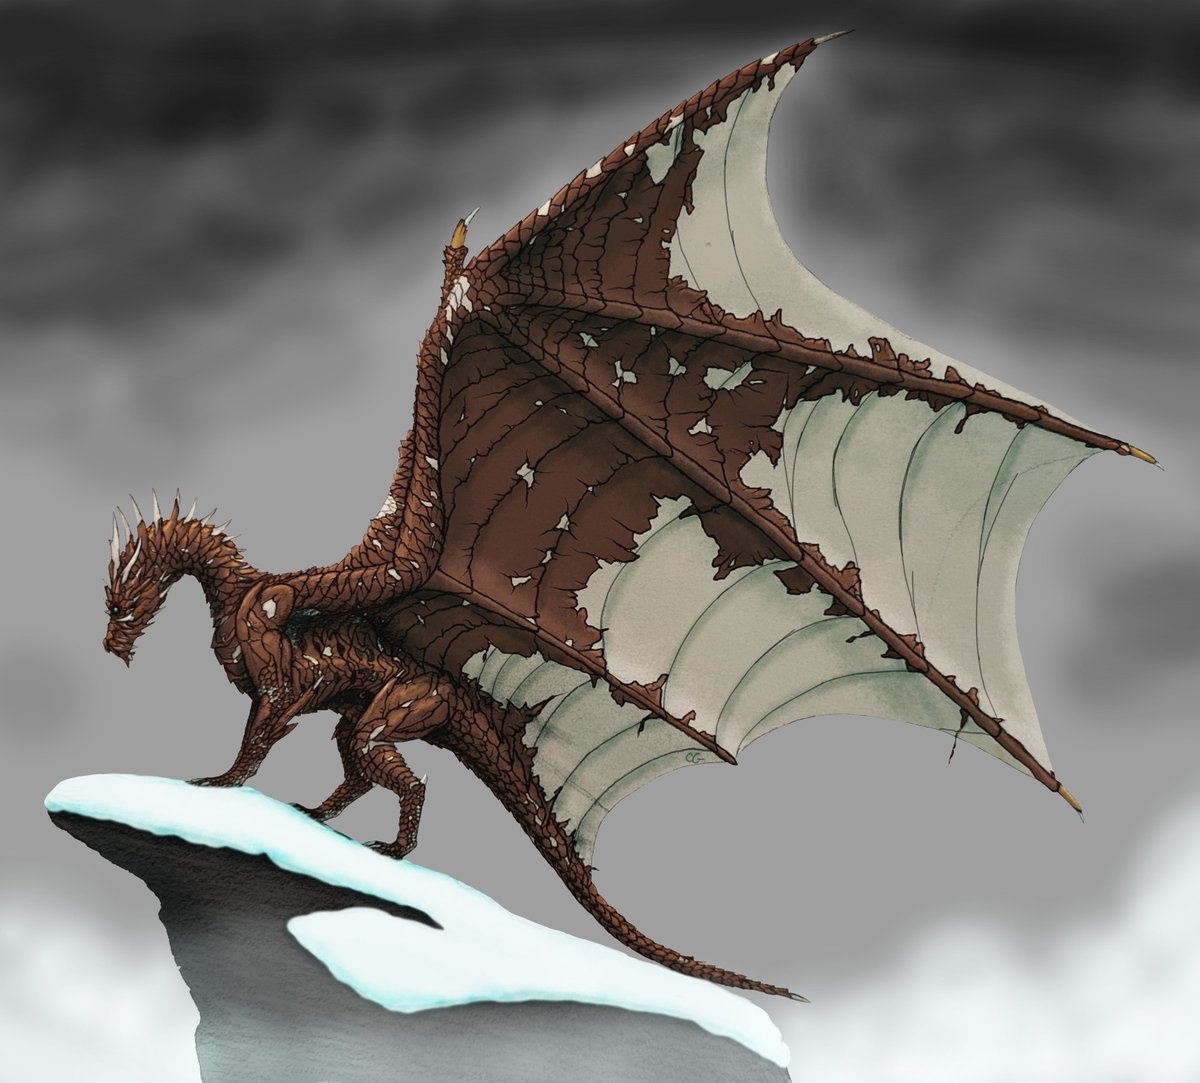 Rusted Kushala Daora from #MonsterHunter Drawn in pencil, colored digitally.